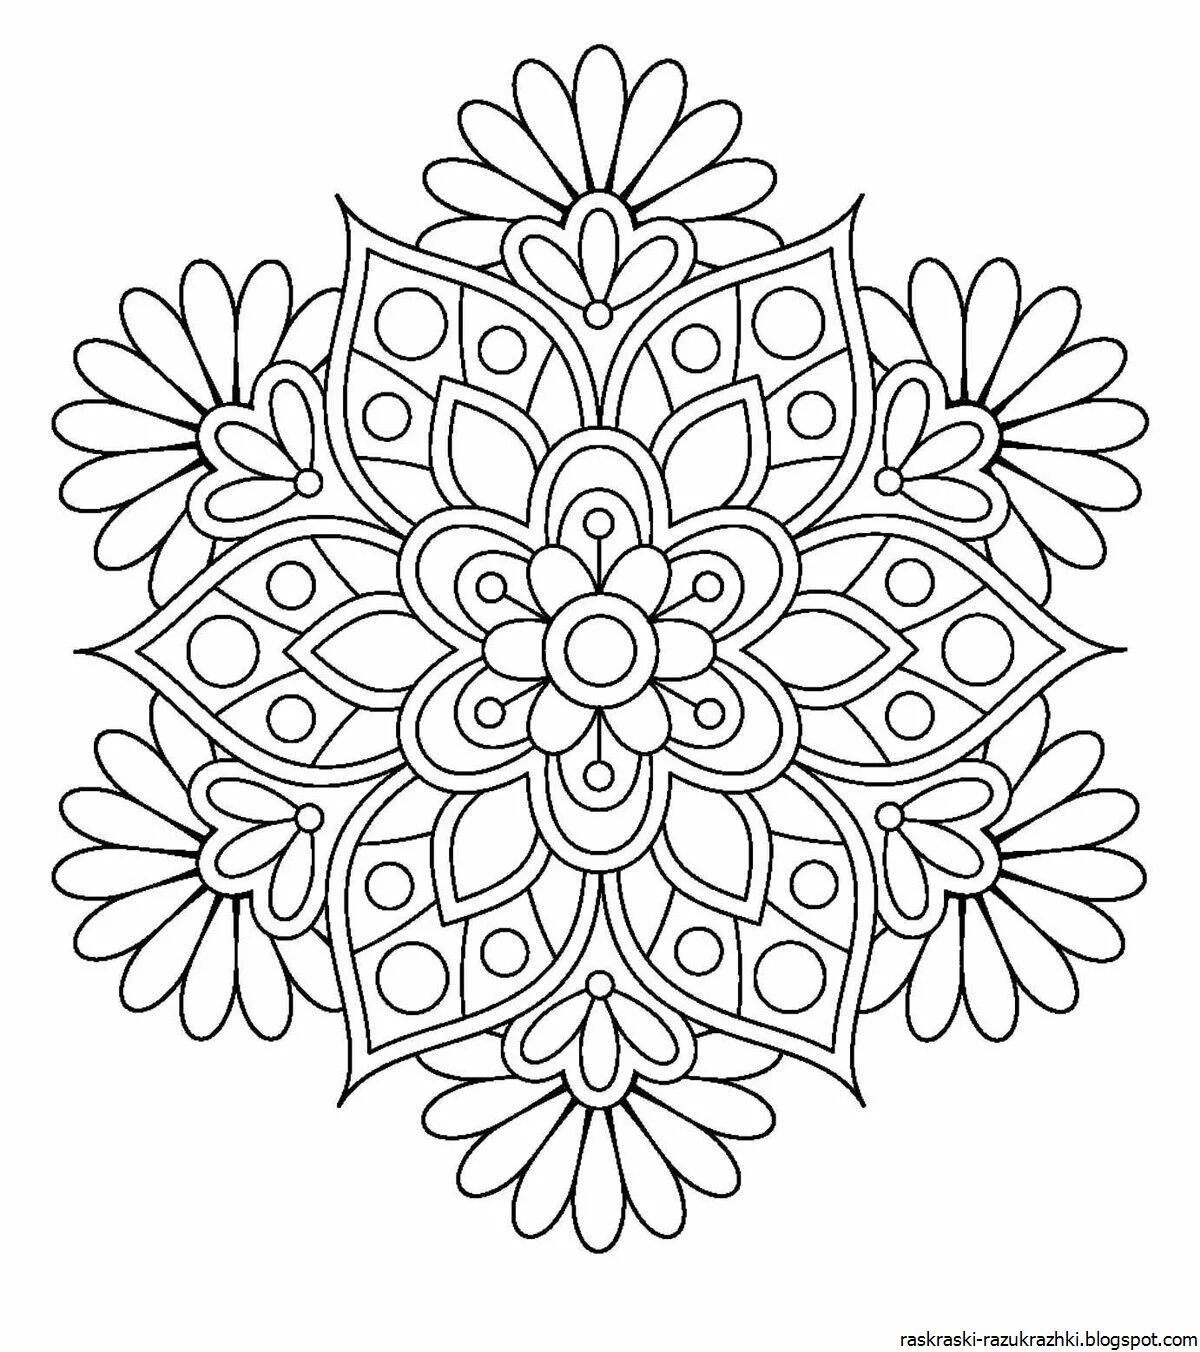 Bright geometric patterns coloring book